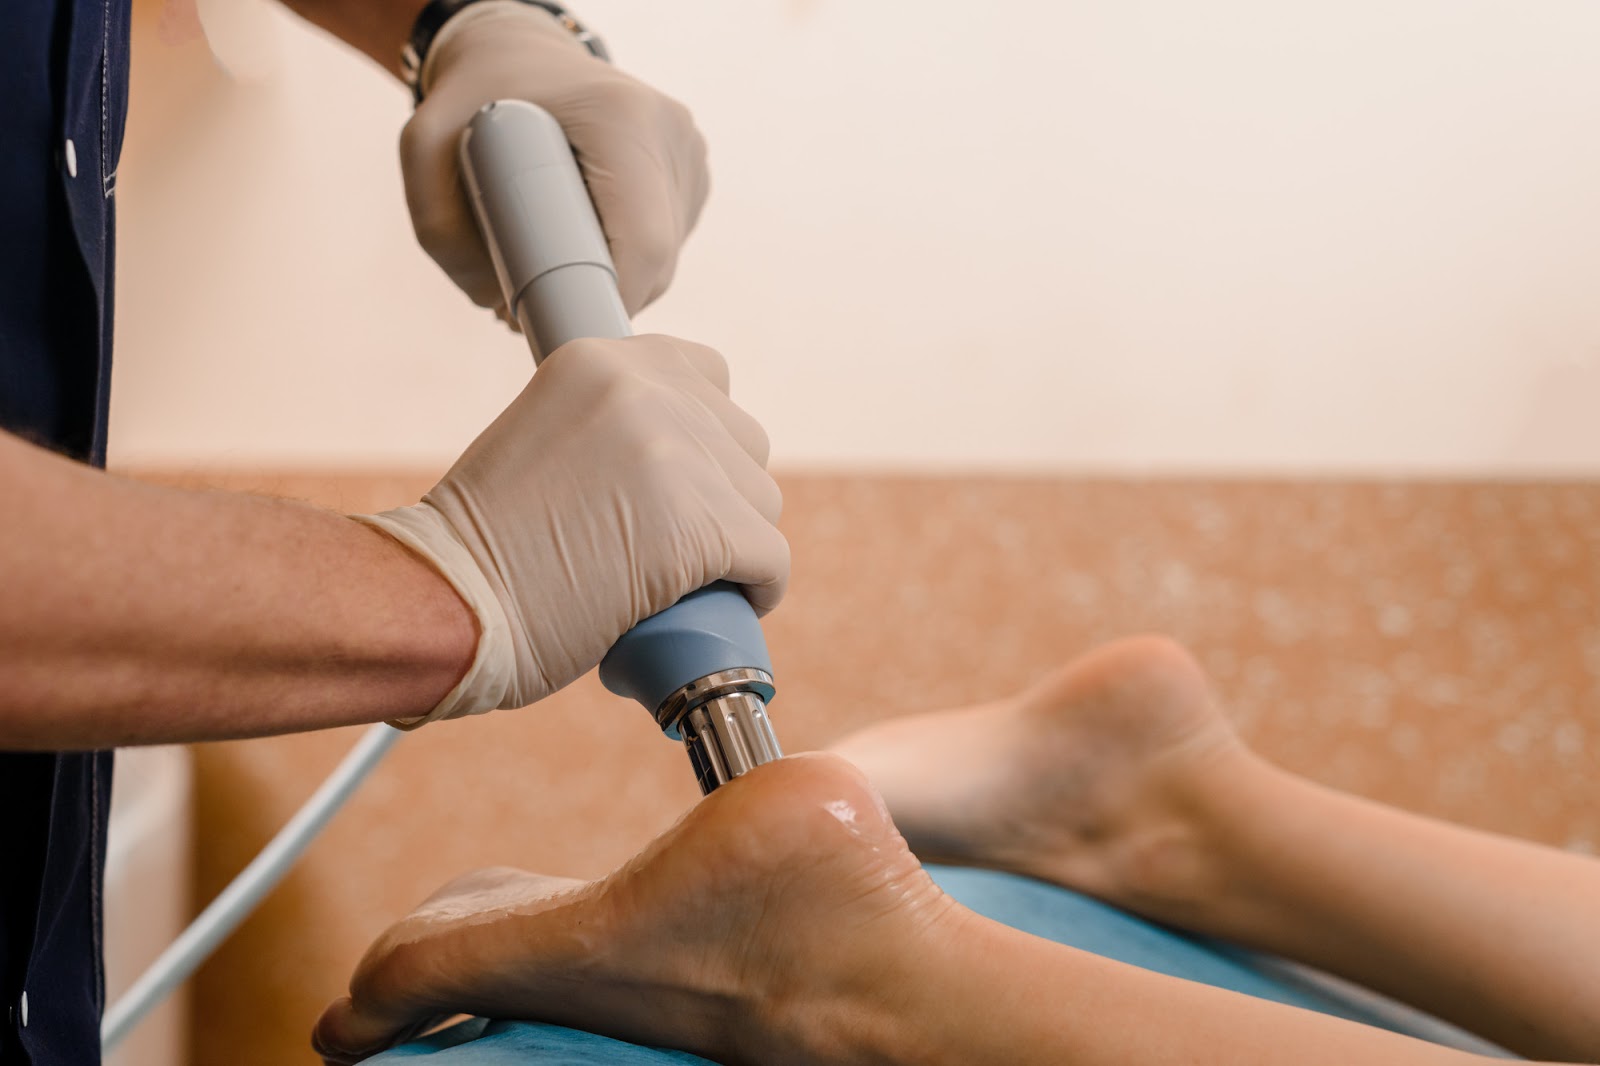 Extracorporeal Shockwave Therapy: What Is It and How Does It Work? - Infinium Medical